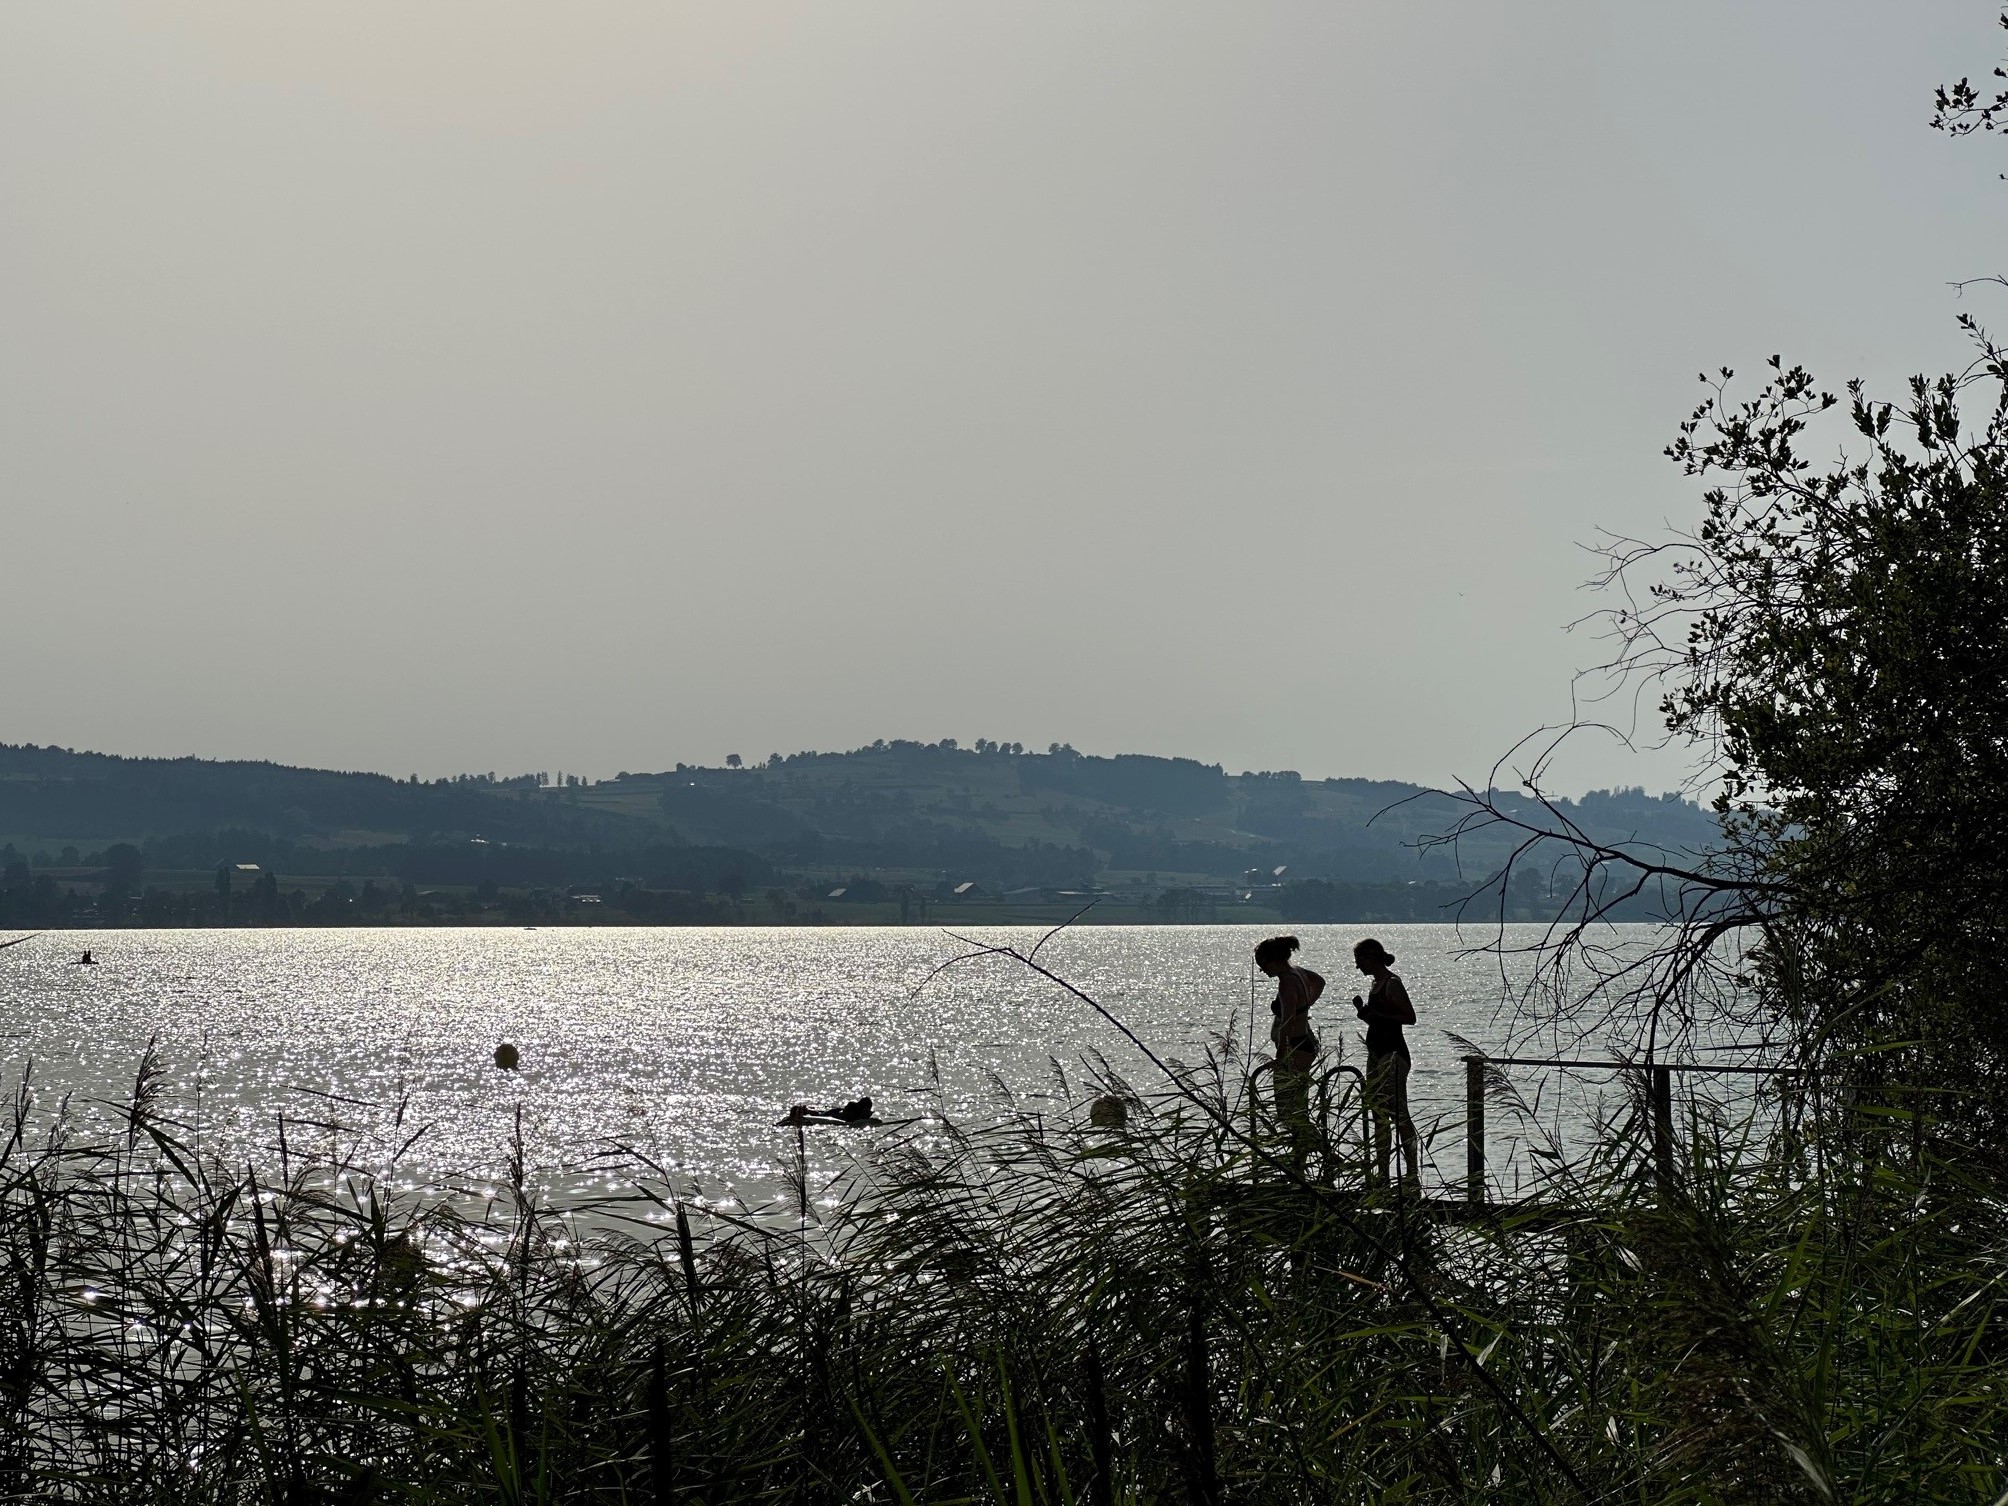 Silhouettes of two women on a jetty at a lake Sempach